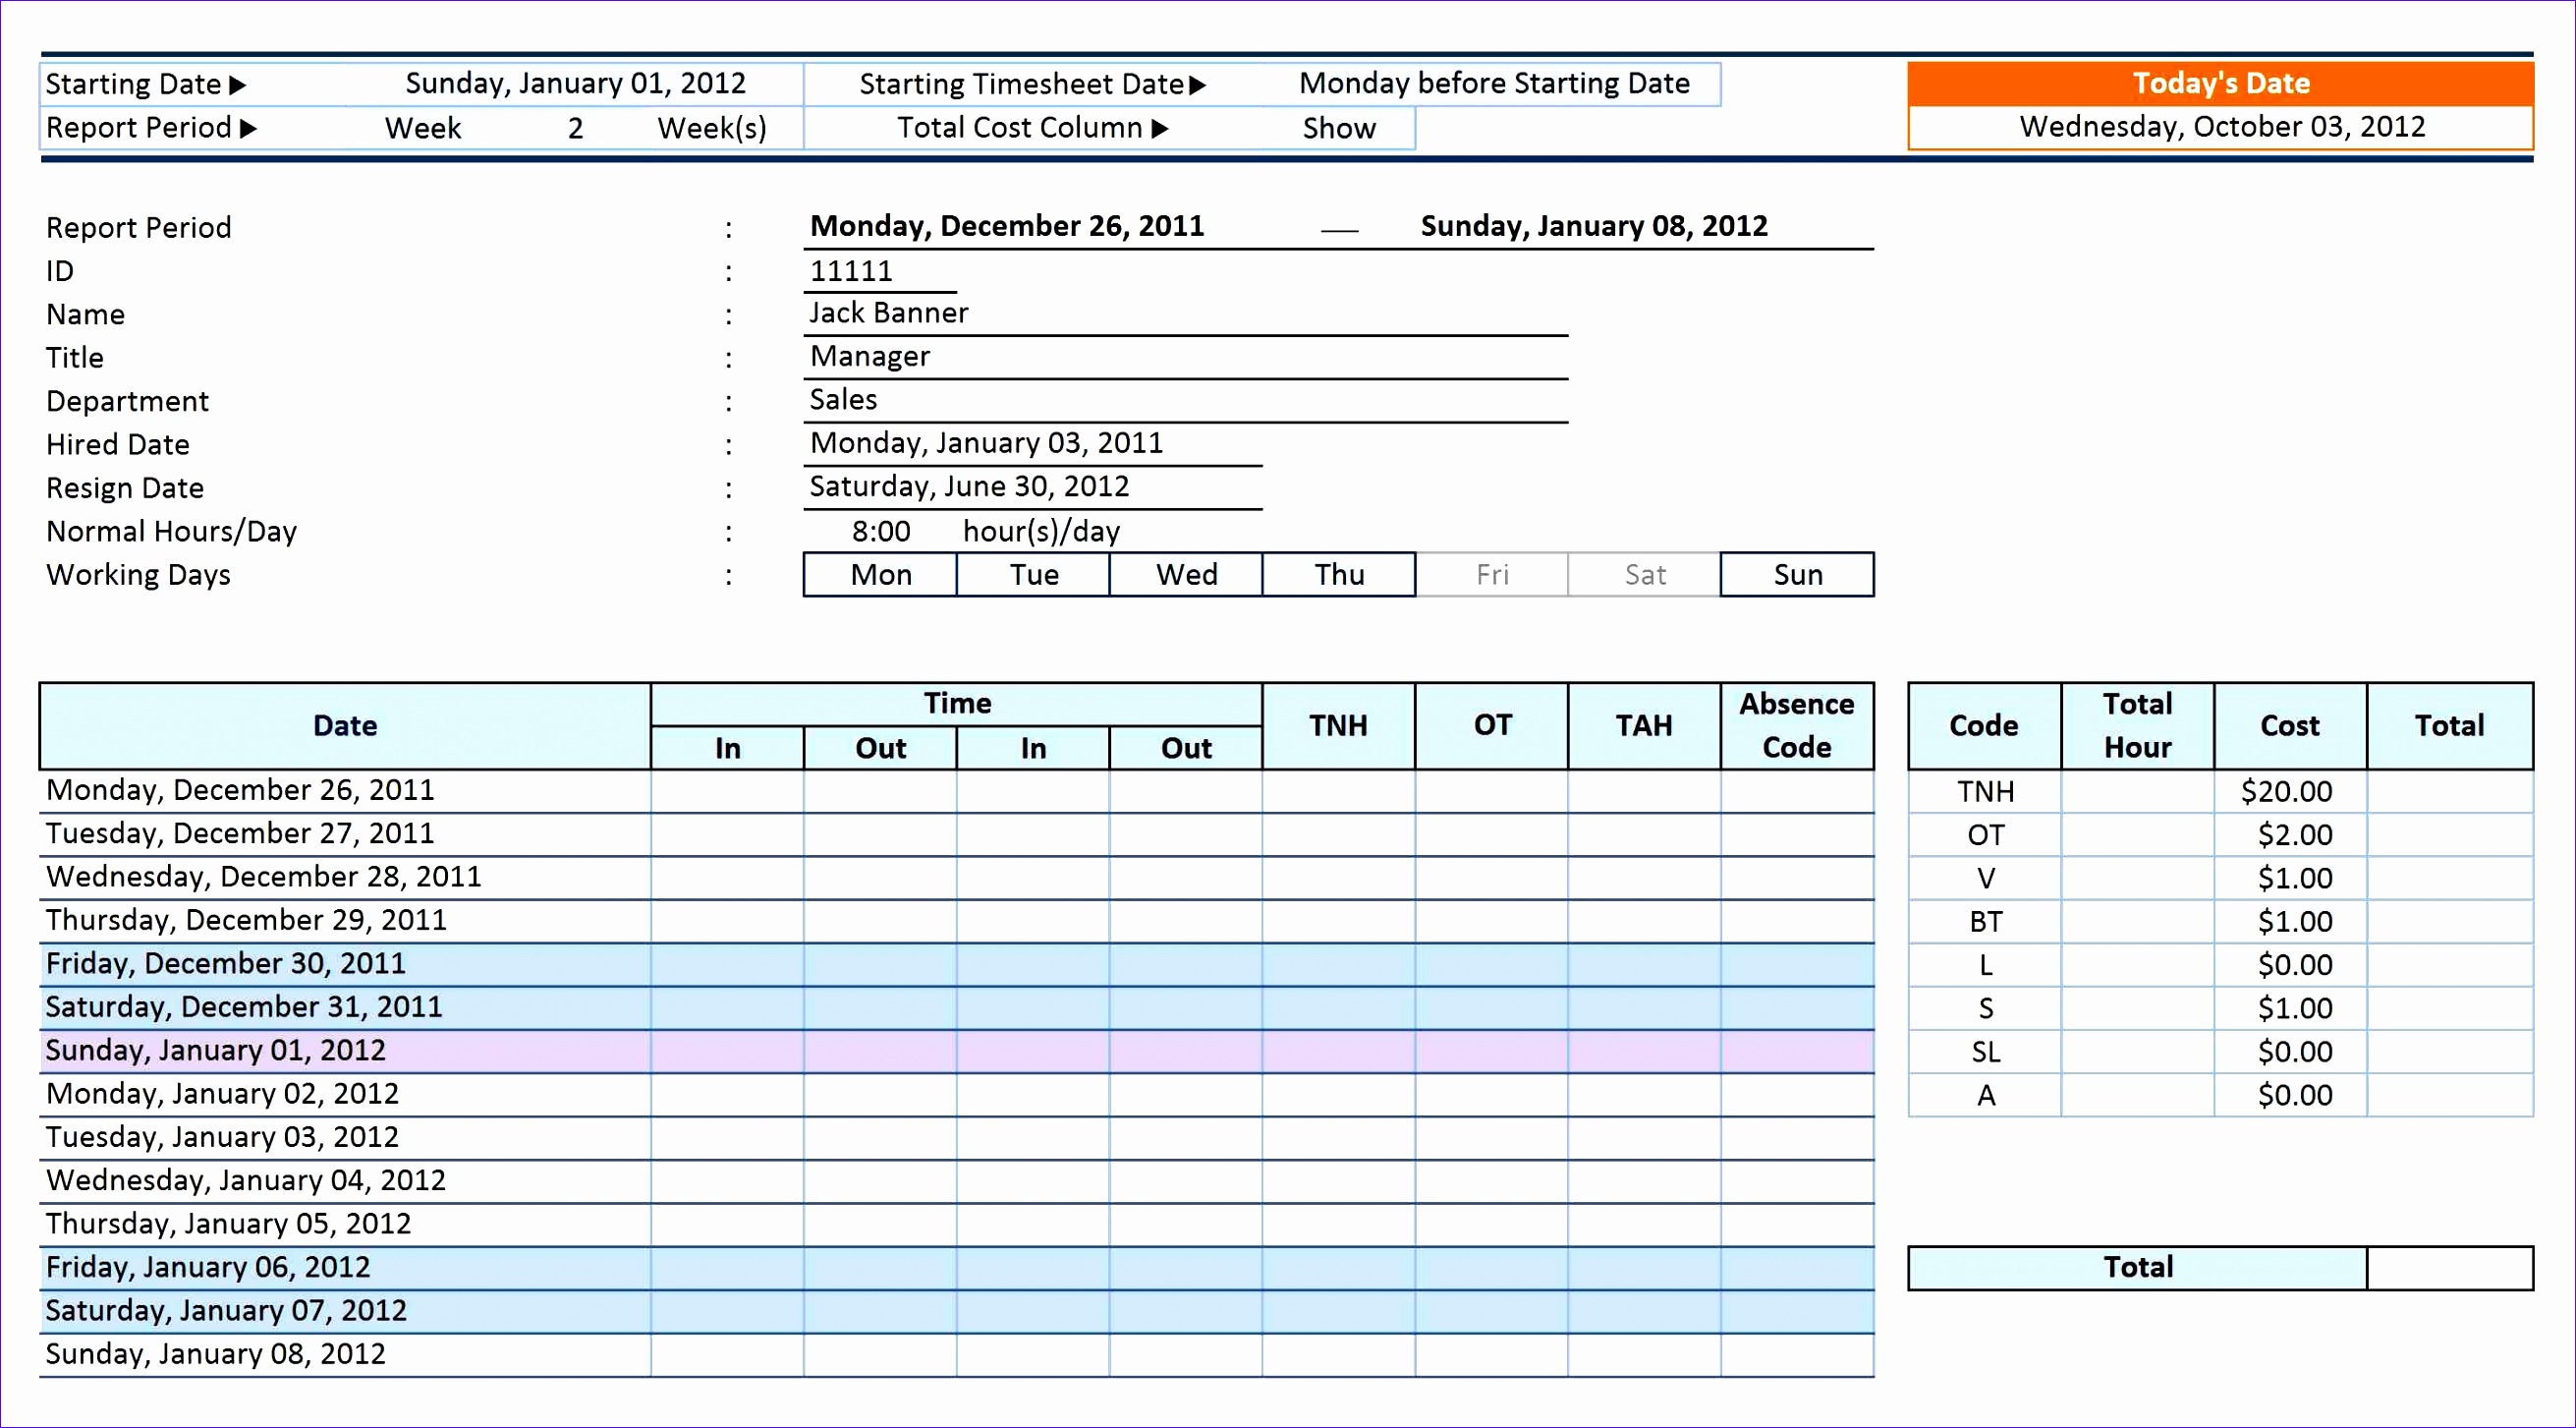 contract management excel spreadsheet 26221453